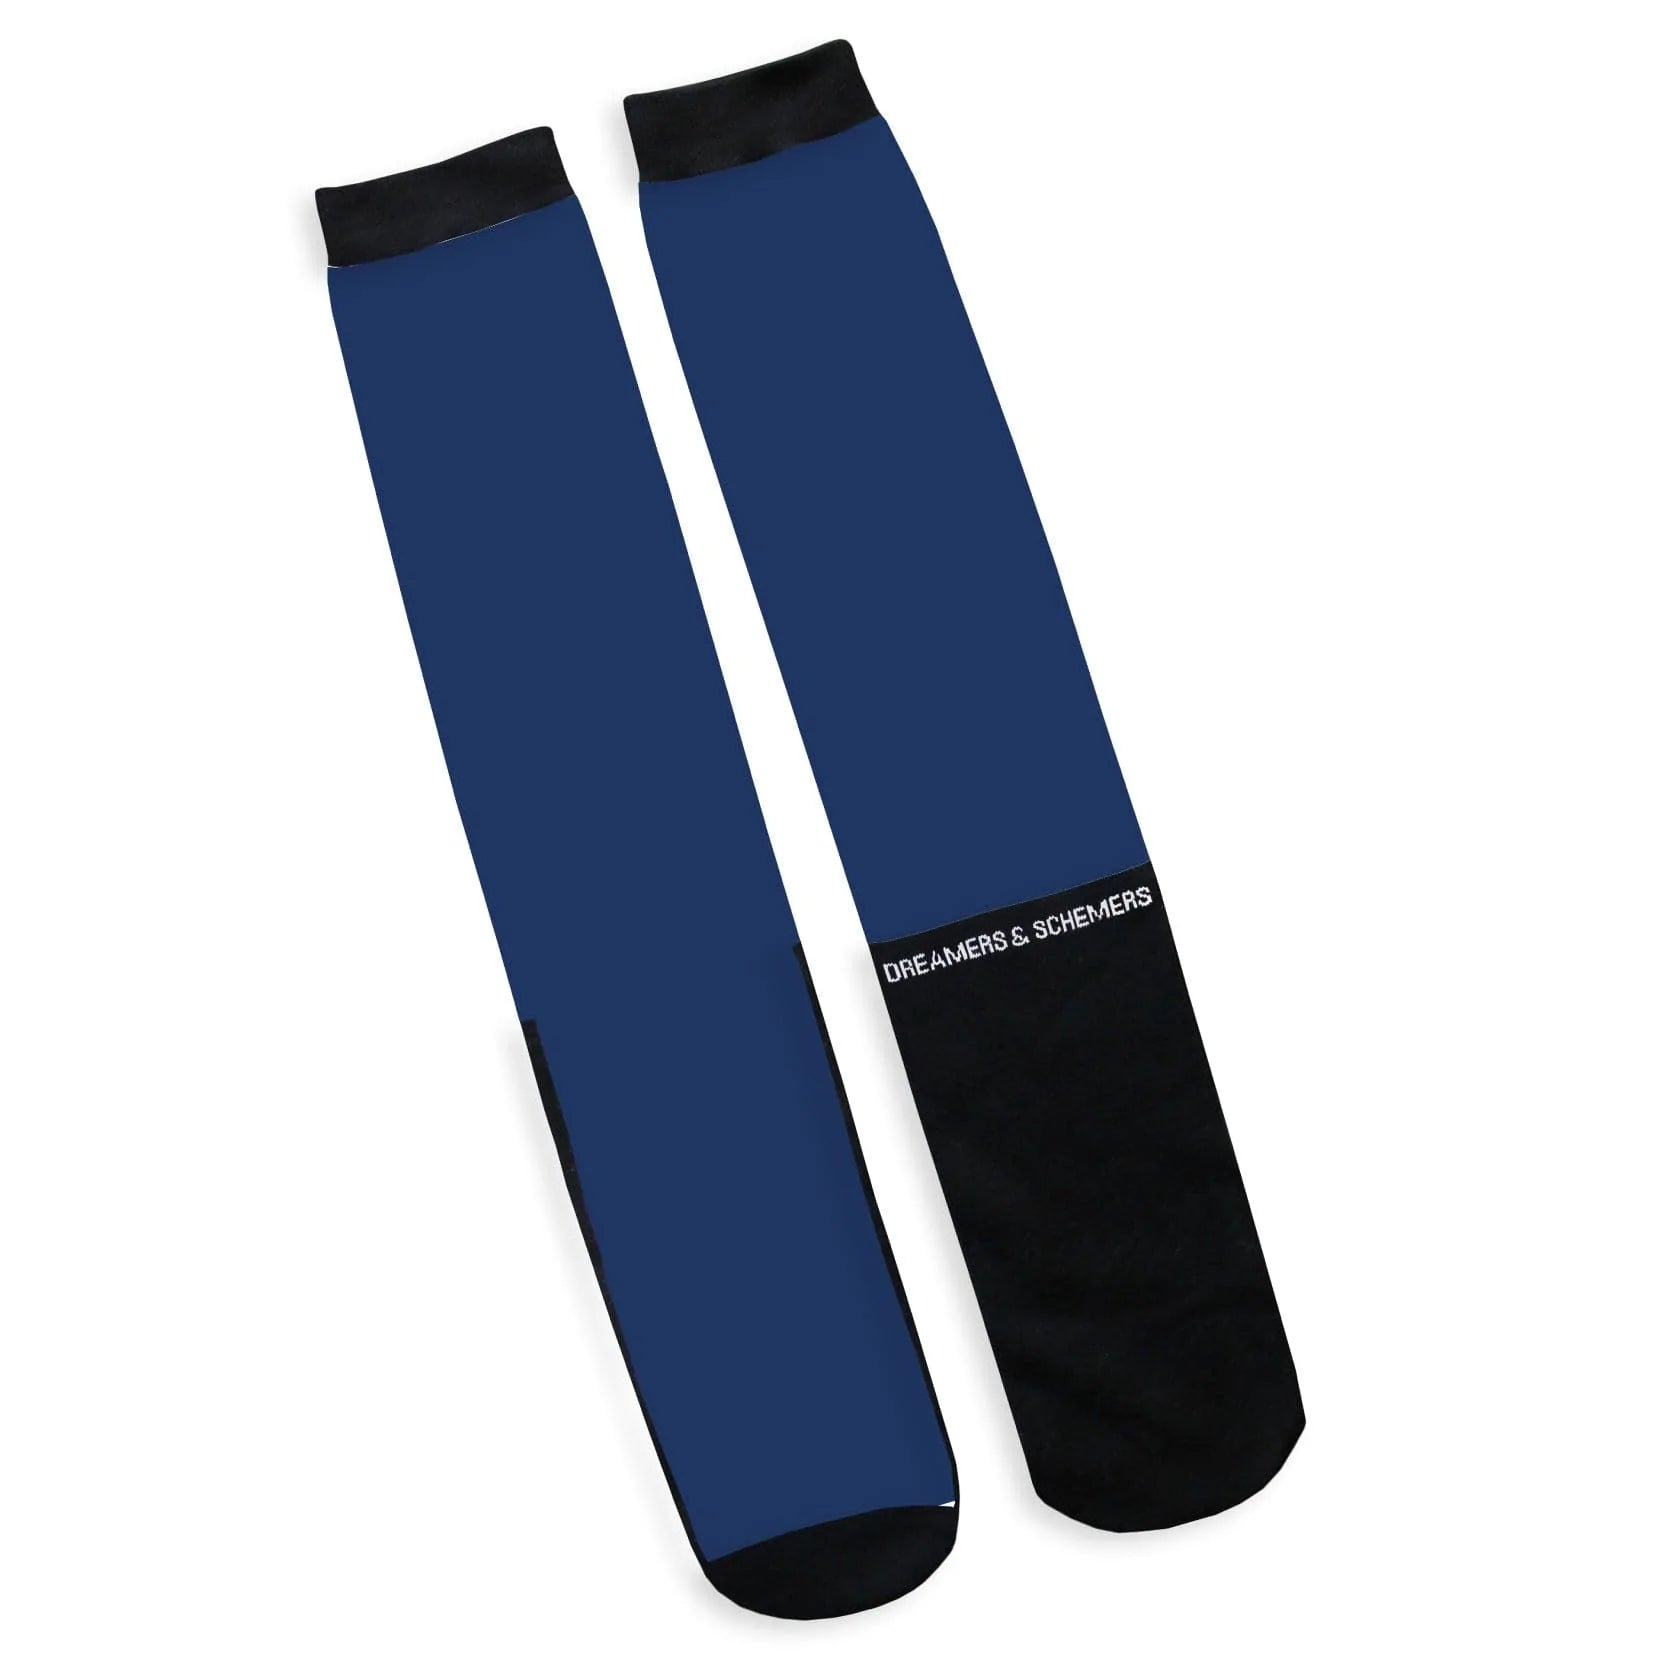 Dreamers & Schemers Boot Socks - Simple Solids Navy